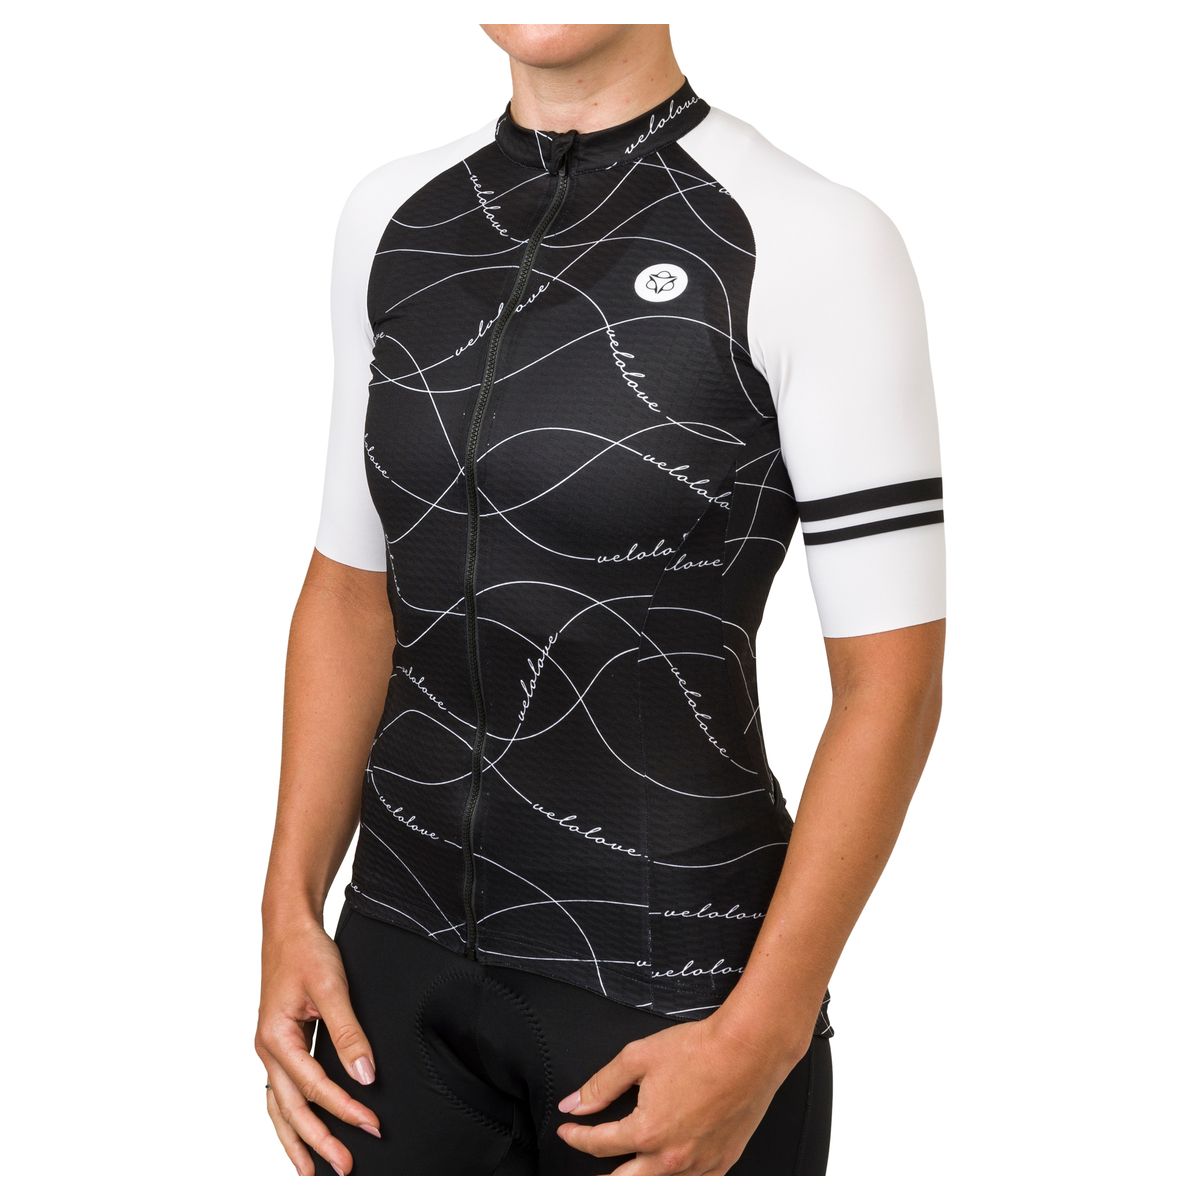 Velo Wave Maglia Essential Donne fit example